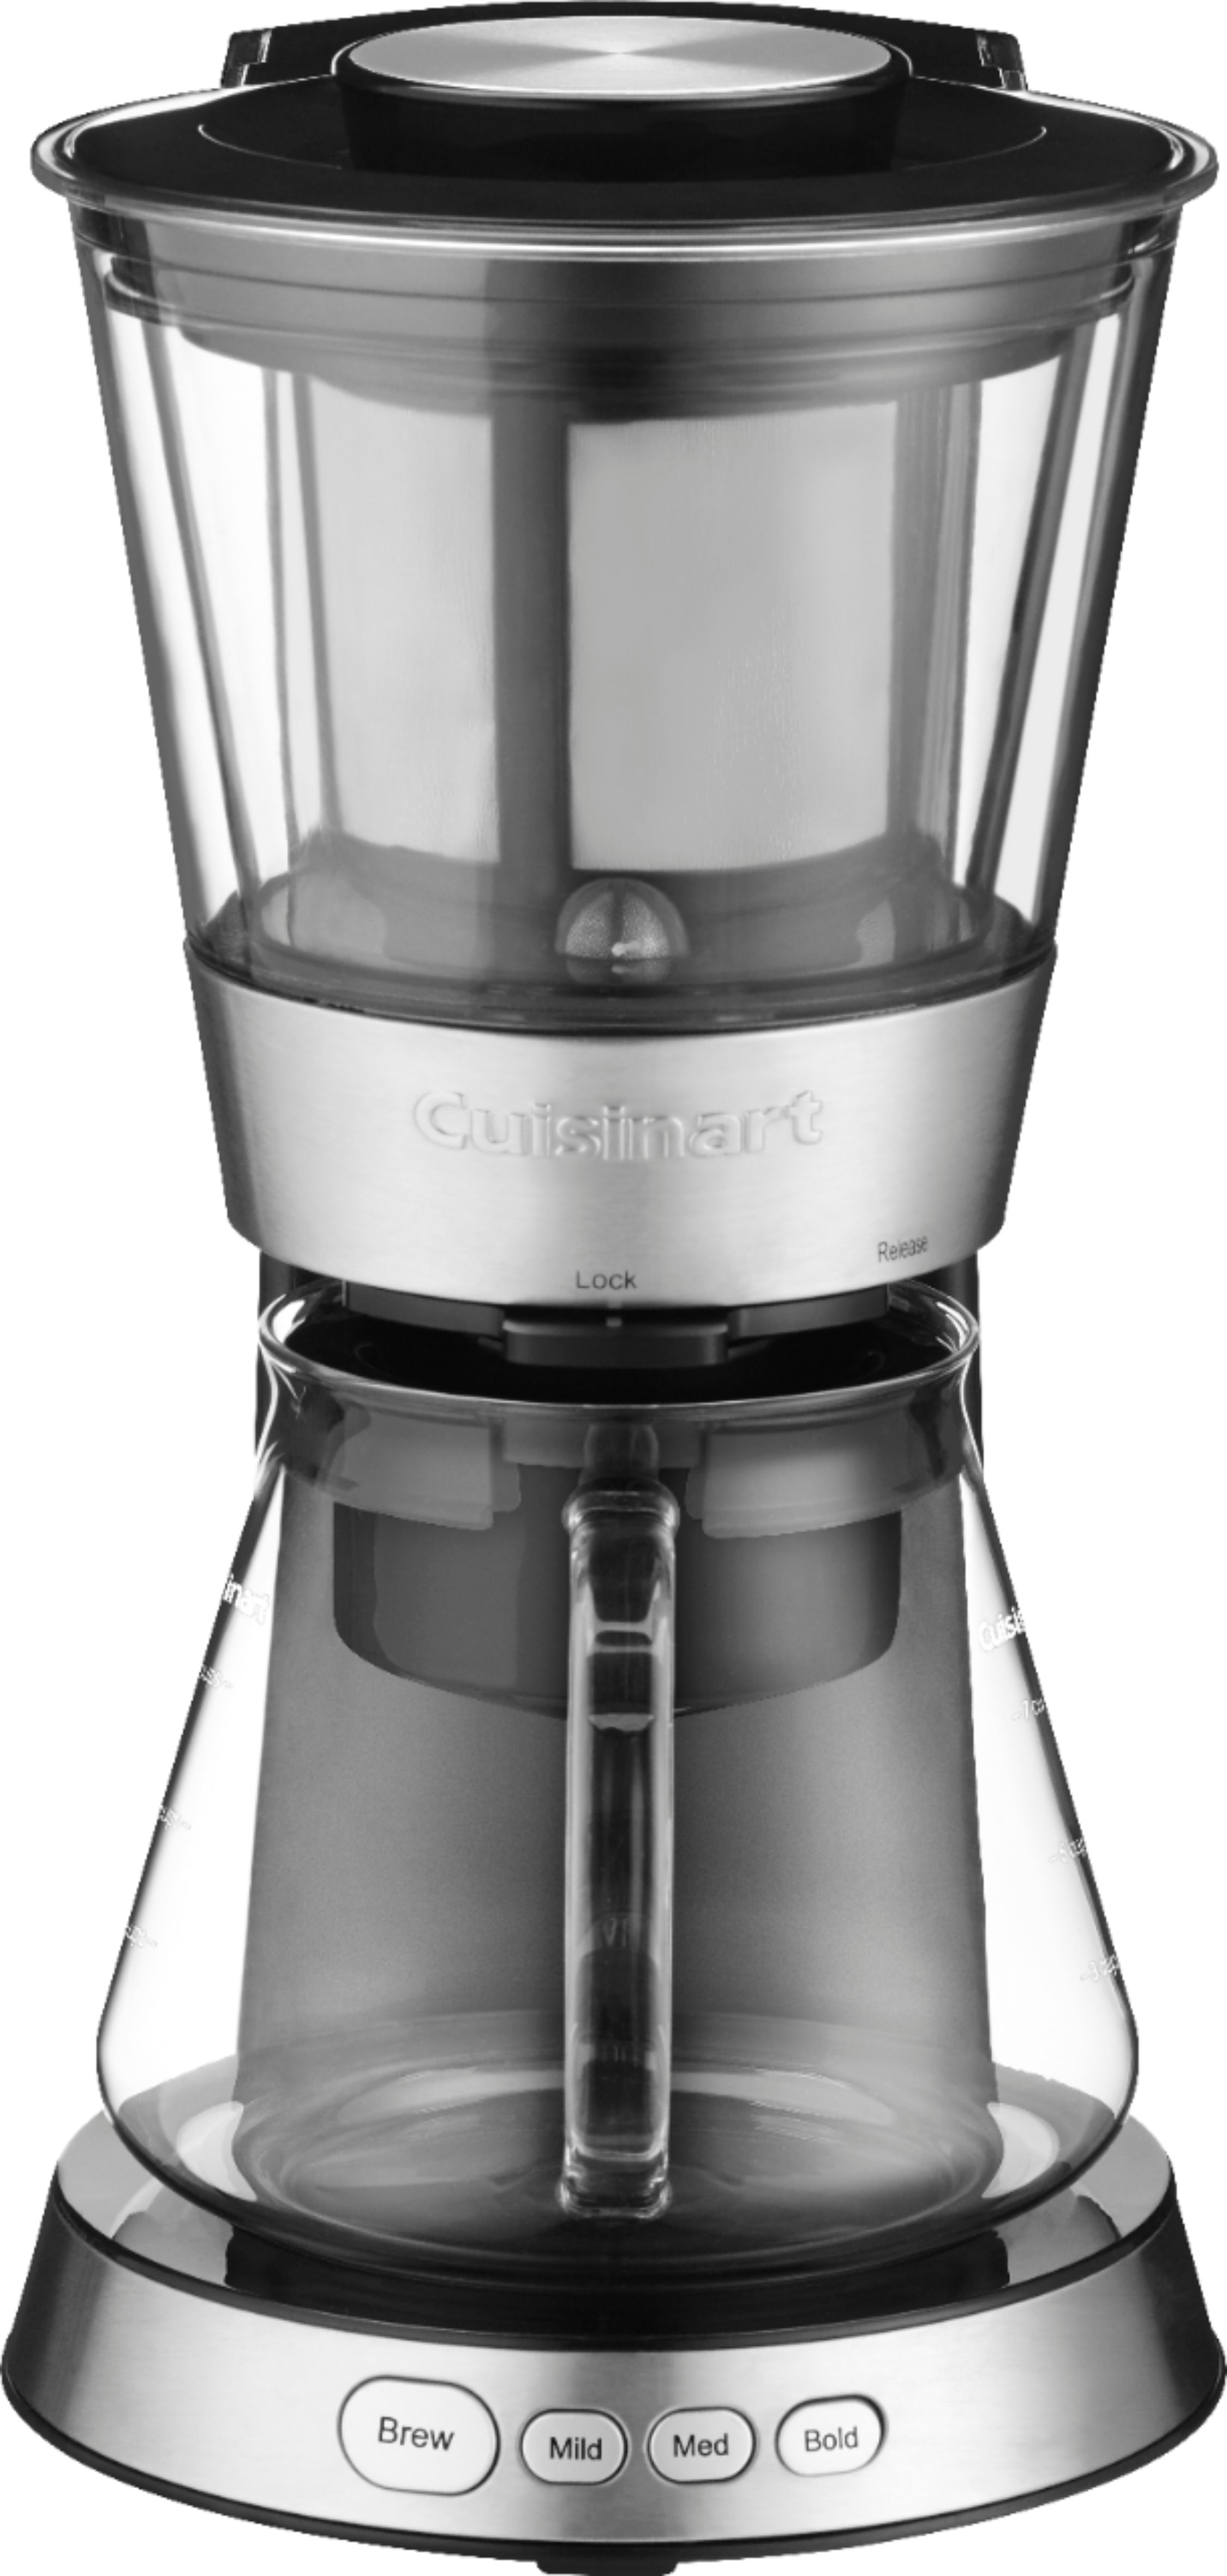 Cuisinart 7-Cup Cold-Brew Coffee Maker Black stainless  - Best Buy